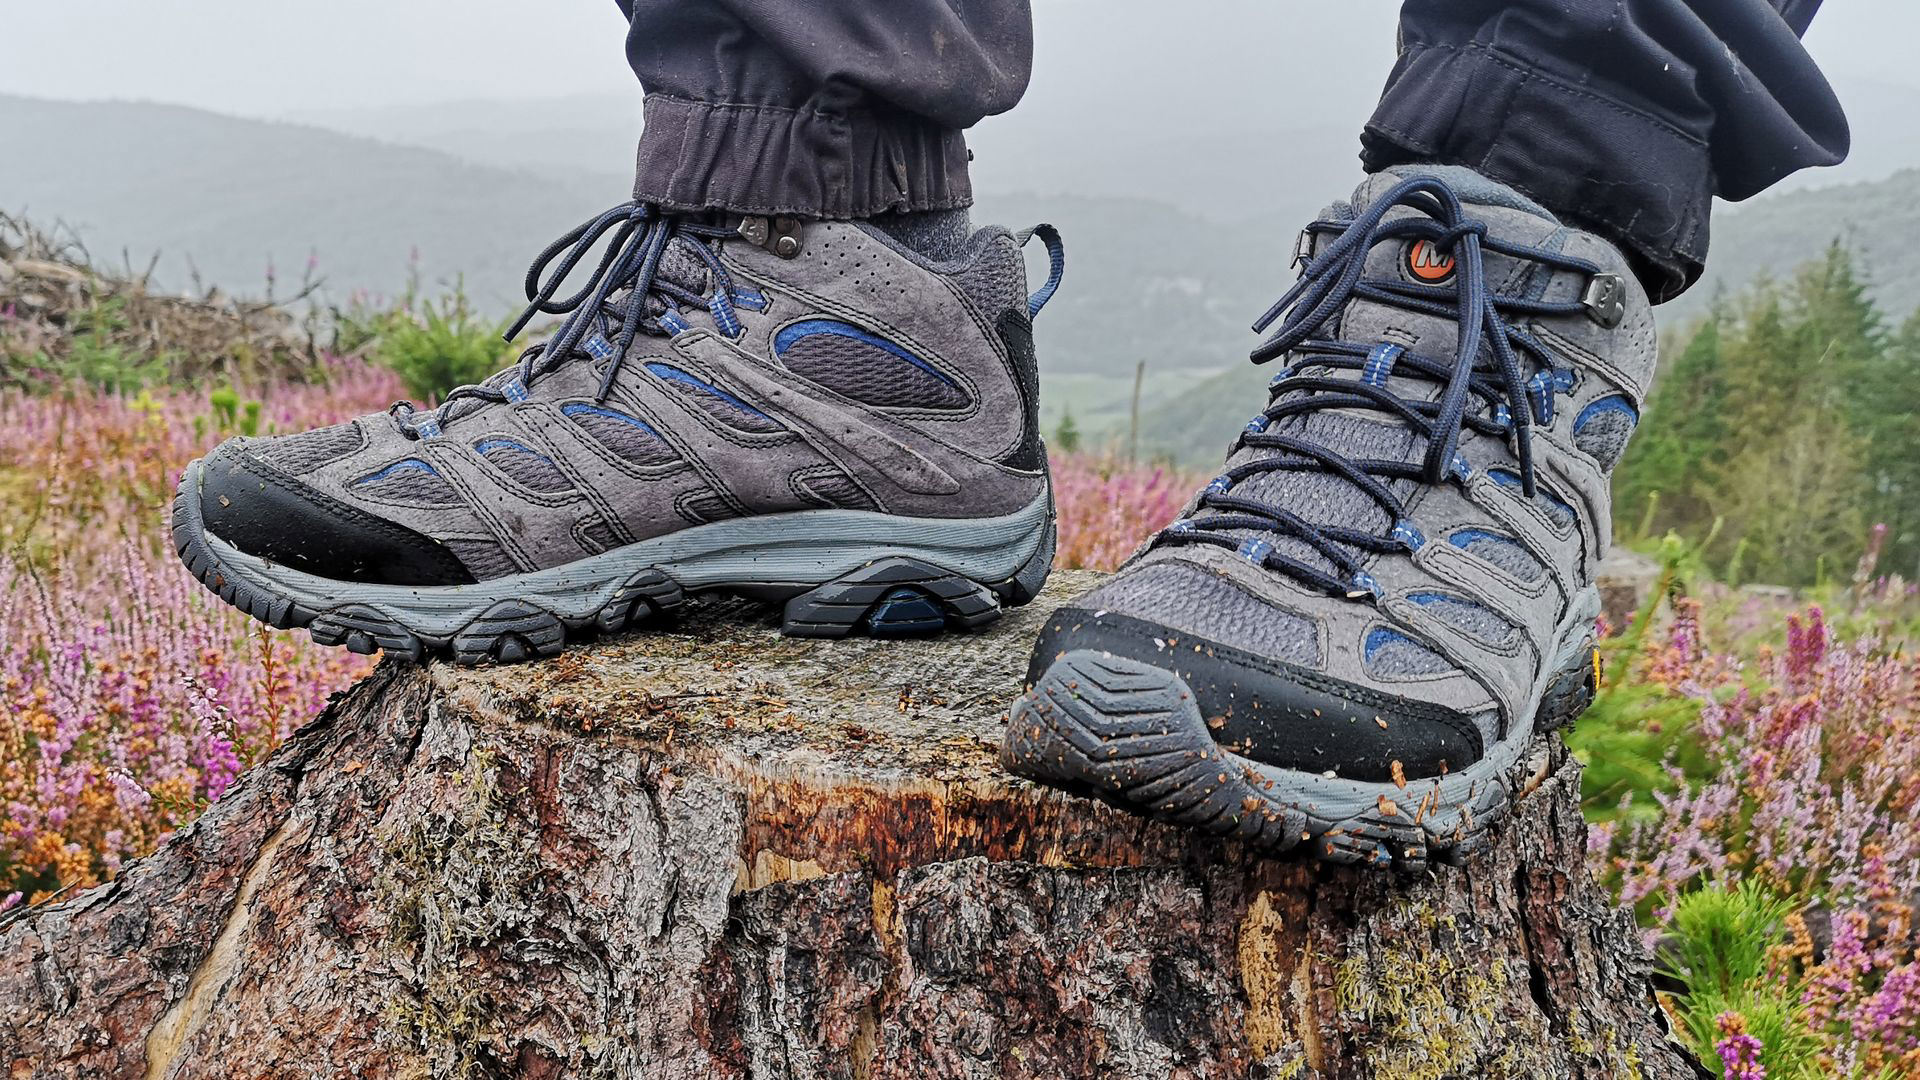 How long will your hiking boots last?